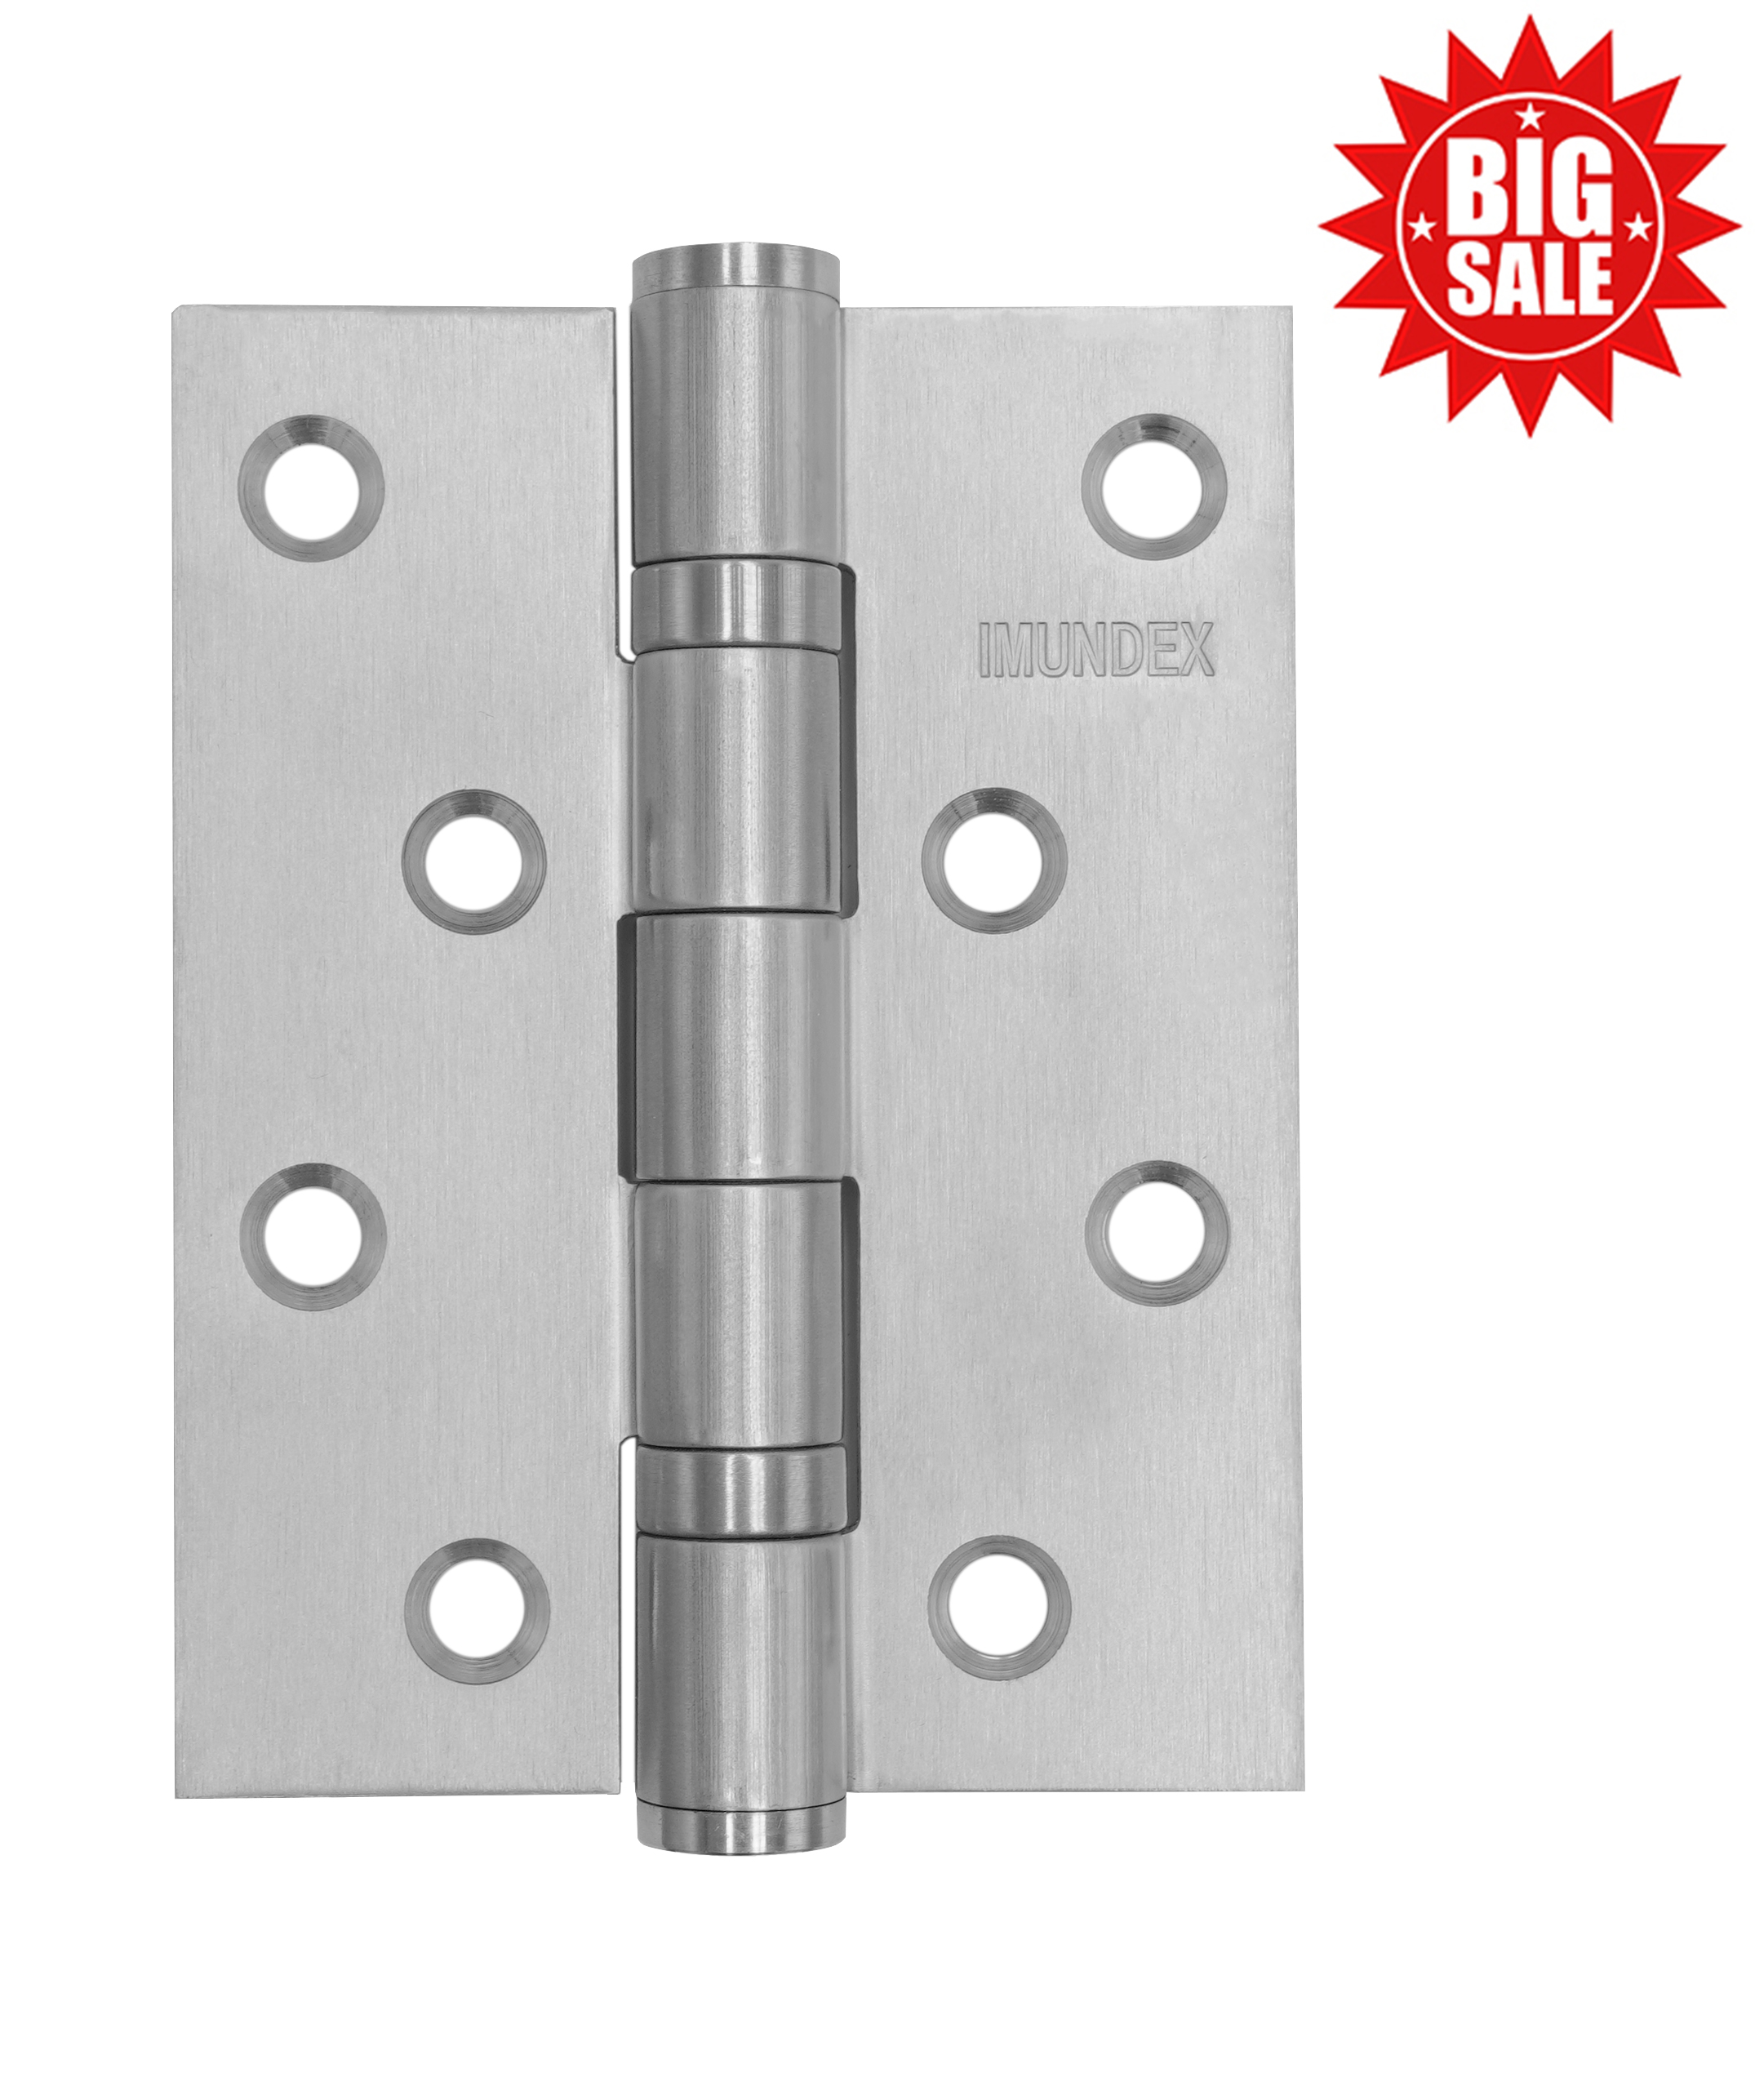 Ball bearing hinge with small size - 4BB - SS201-J1